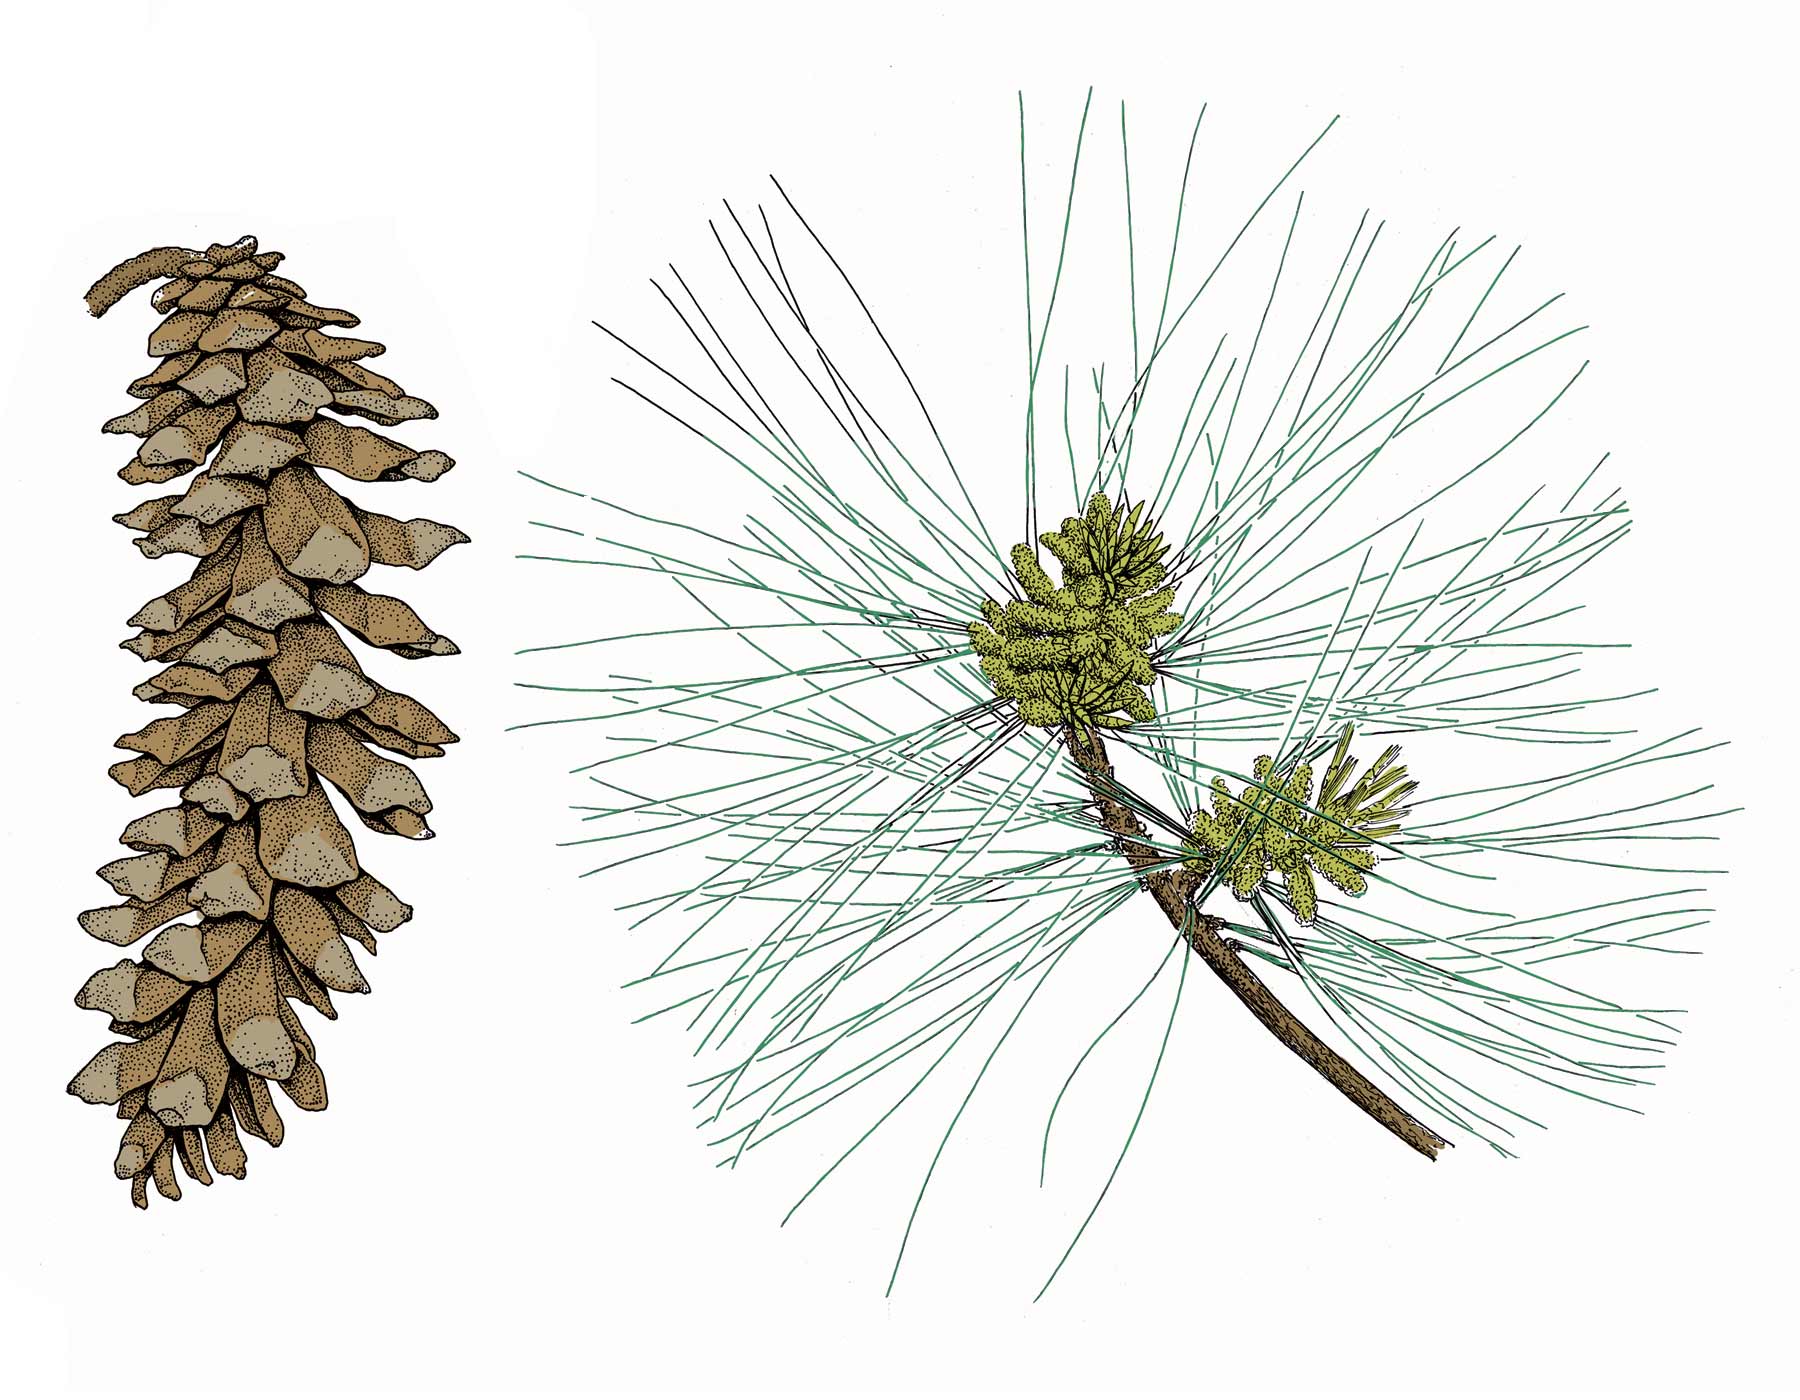 Eastern White Pine | MDC Discover Nature